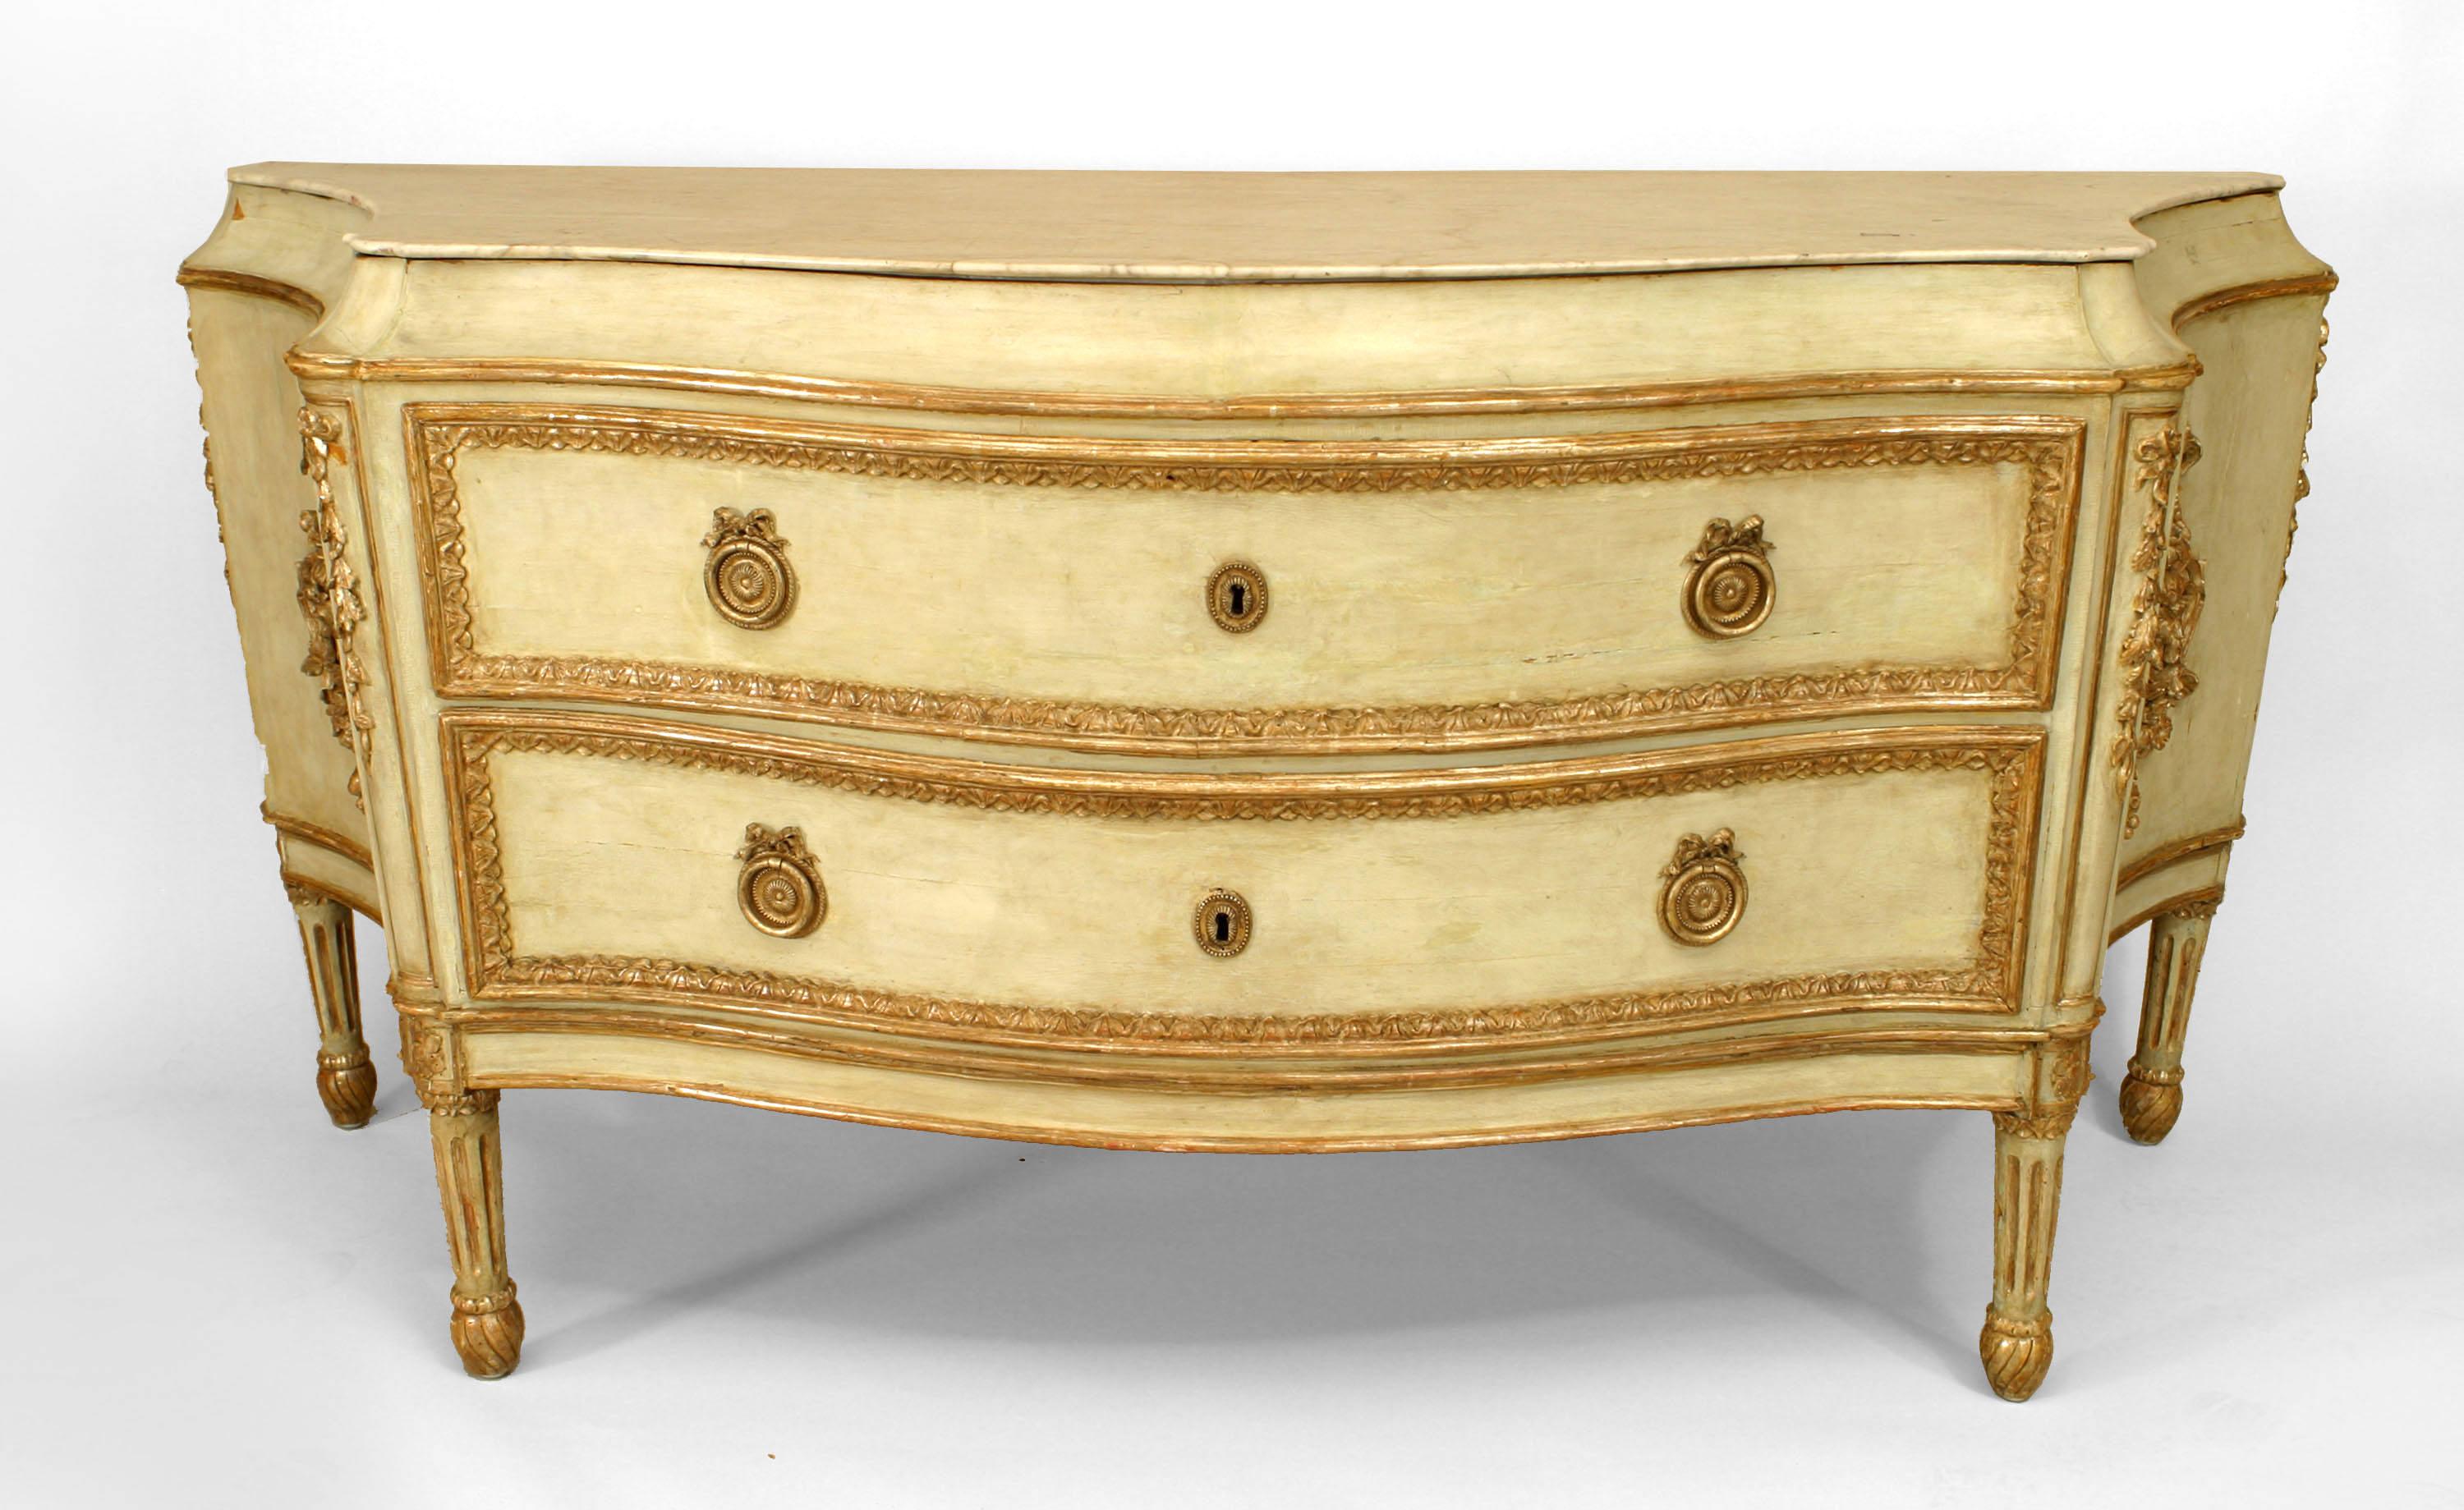 Italian Neo-classic (18th Century) Ivory with green undertones painted monumental commode with gold gilt carved trim on sides and 2 drawers under a white serpentine shaped marble top
